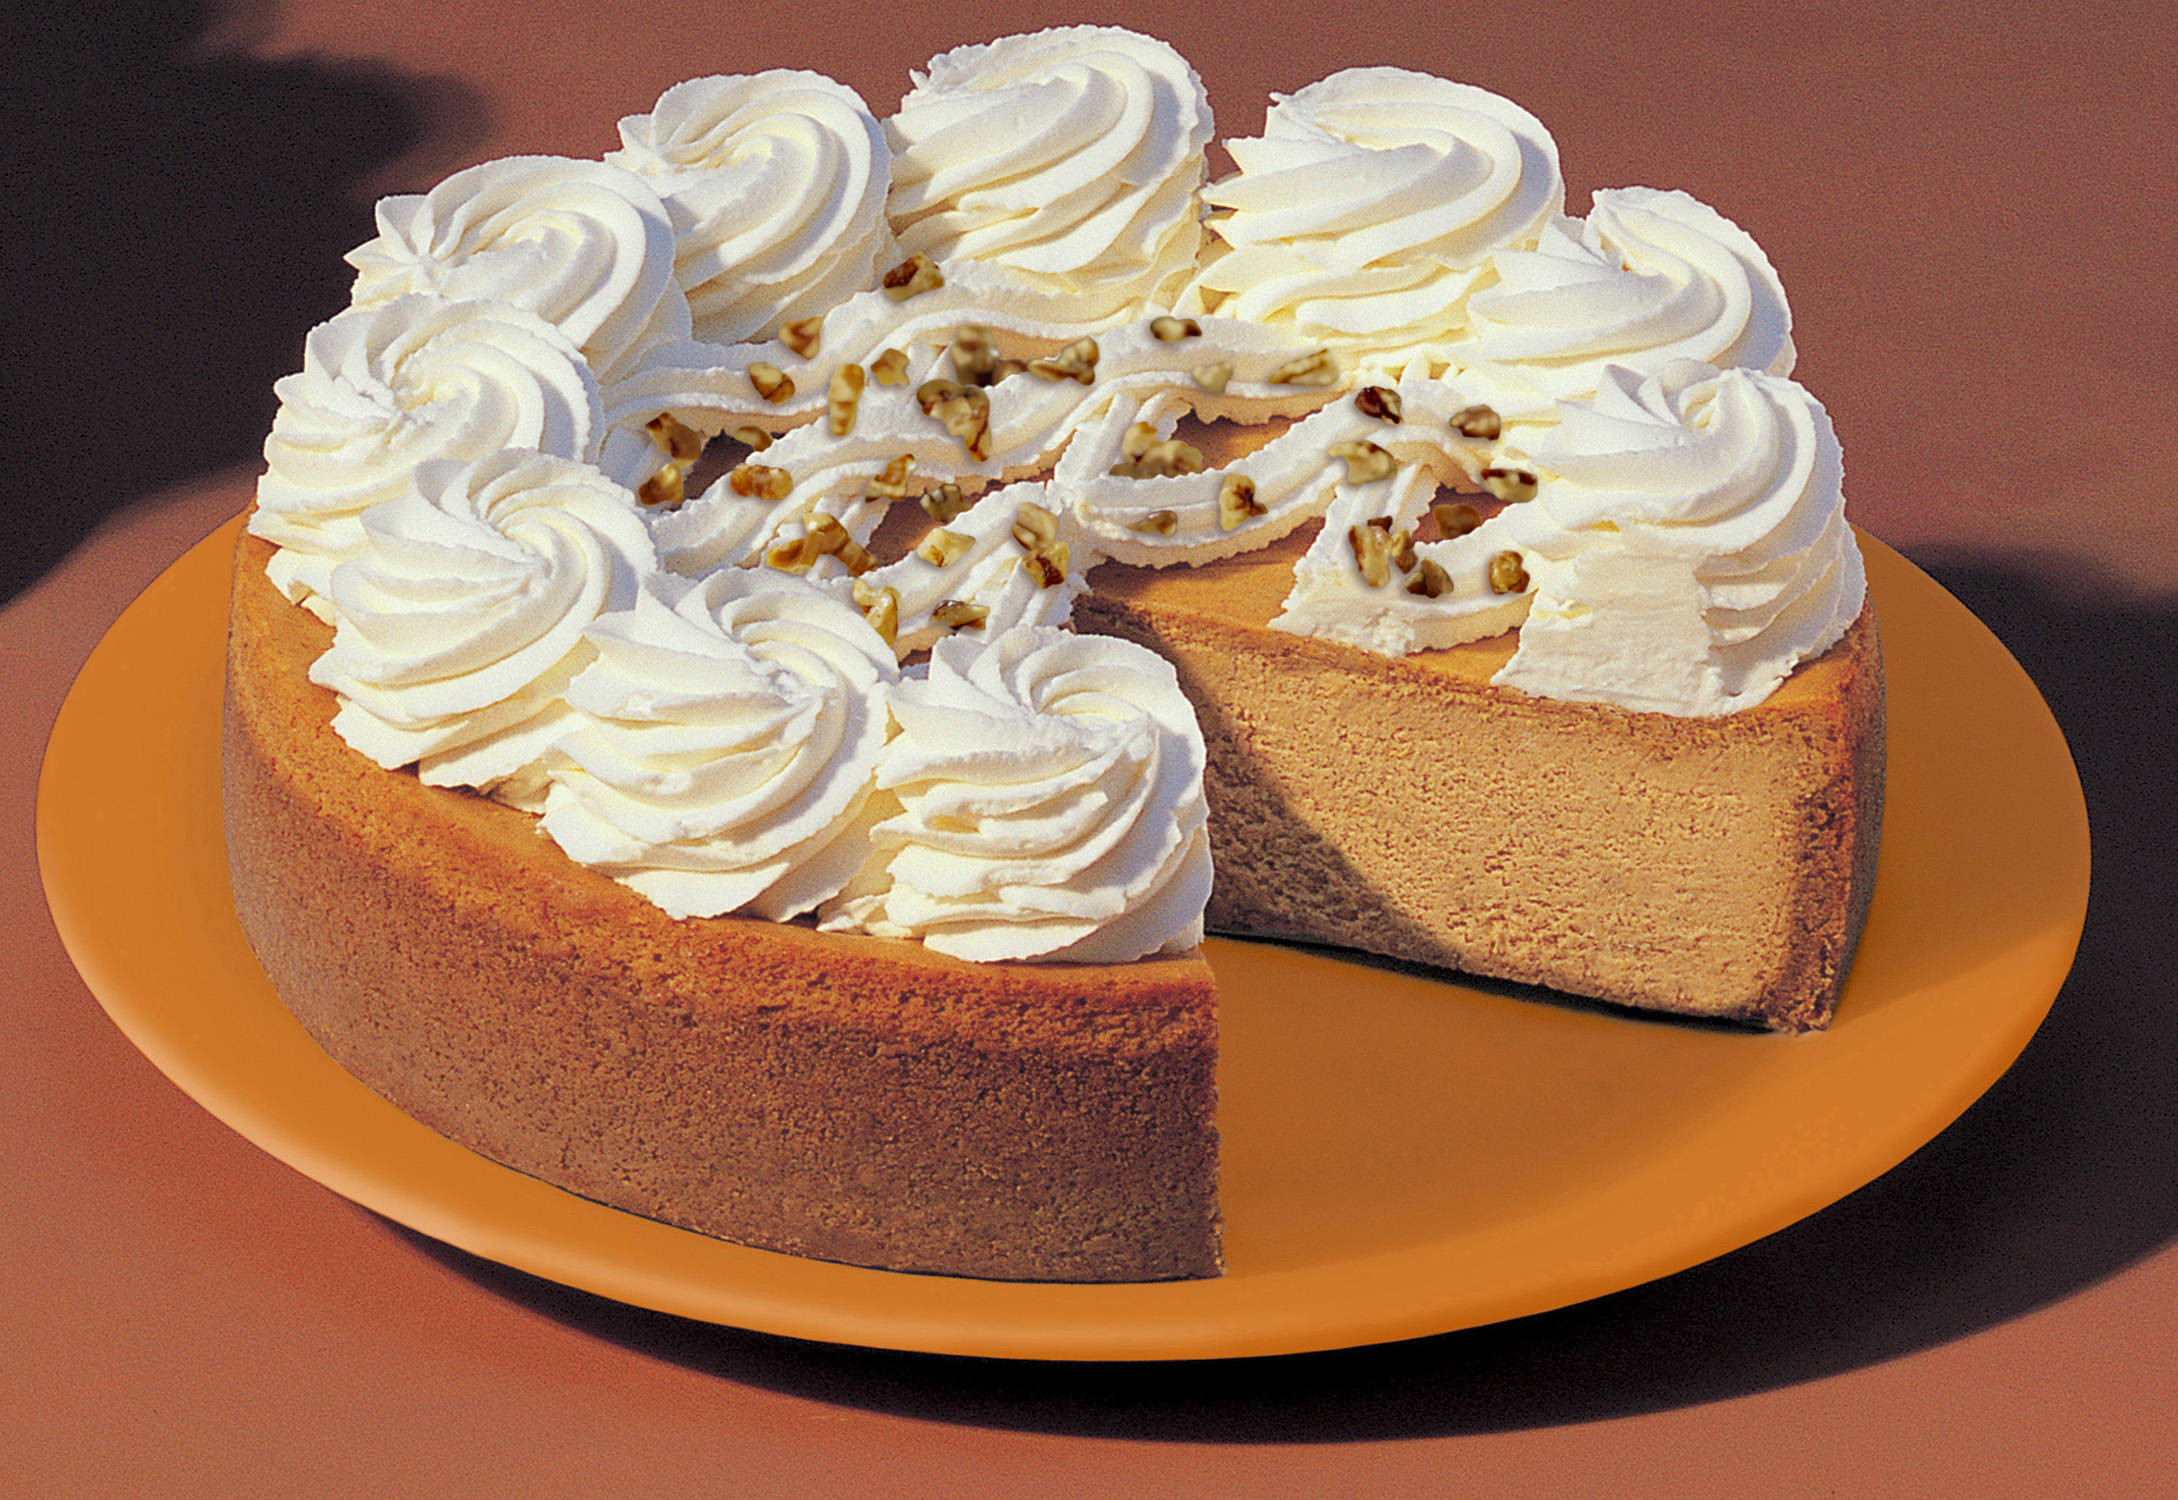 15 Recipes for Great Cheesecake Factory Pumpkin Cheesecake Recipe